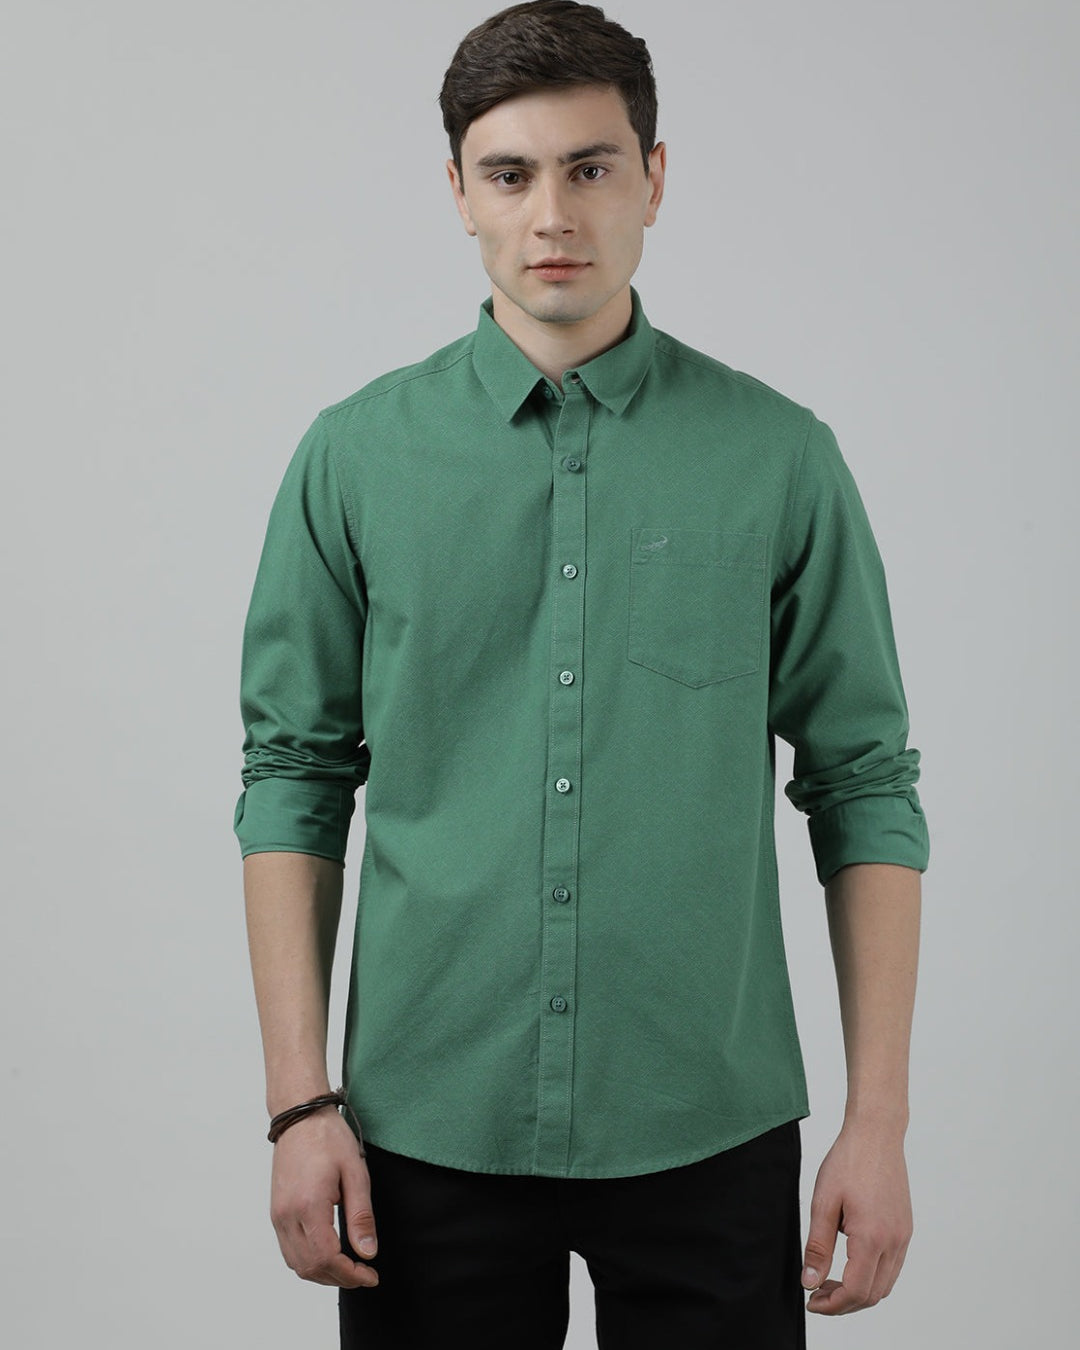 Casual Full Sleeve Comfort Fit Printed Shirt Green with Collar for Men